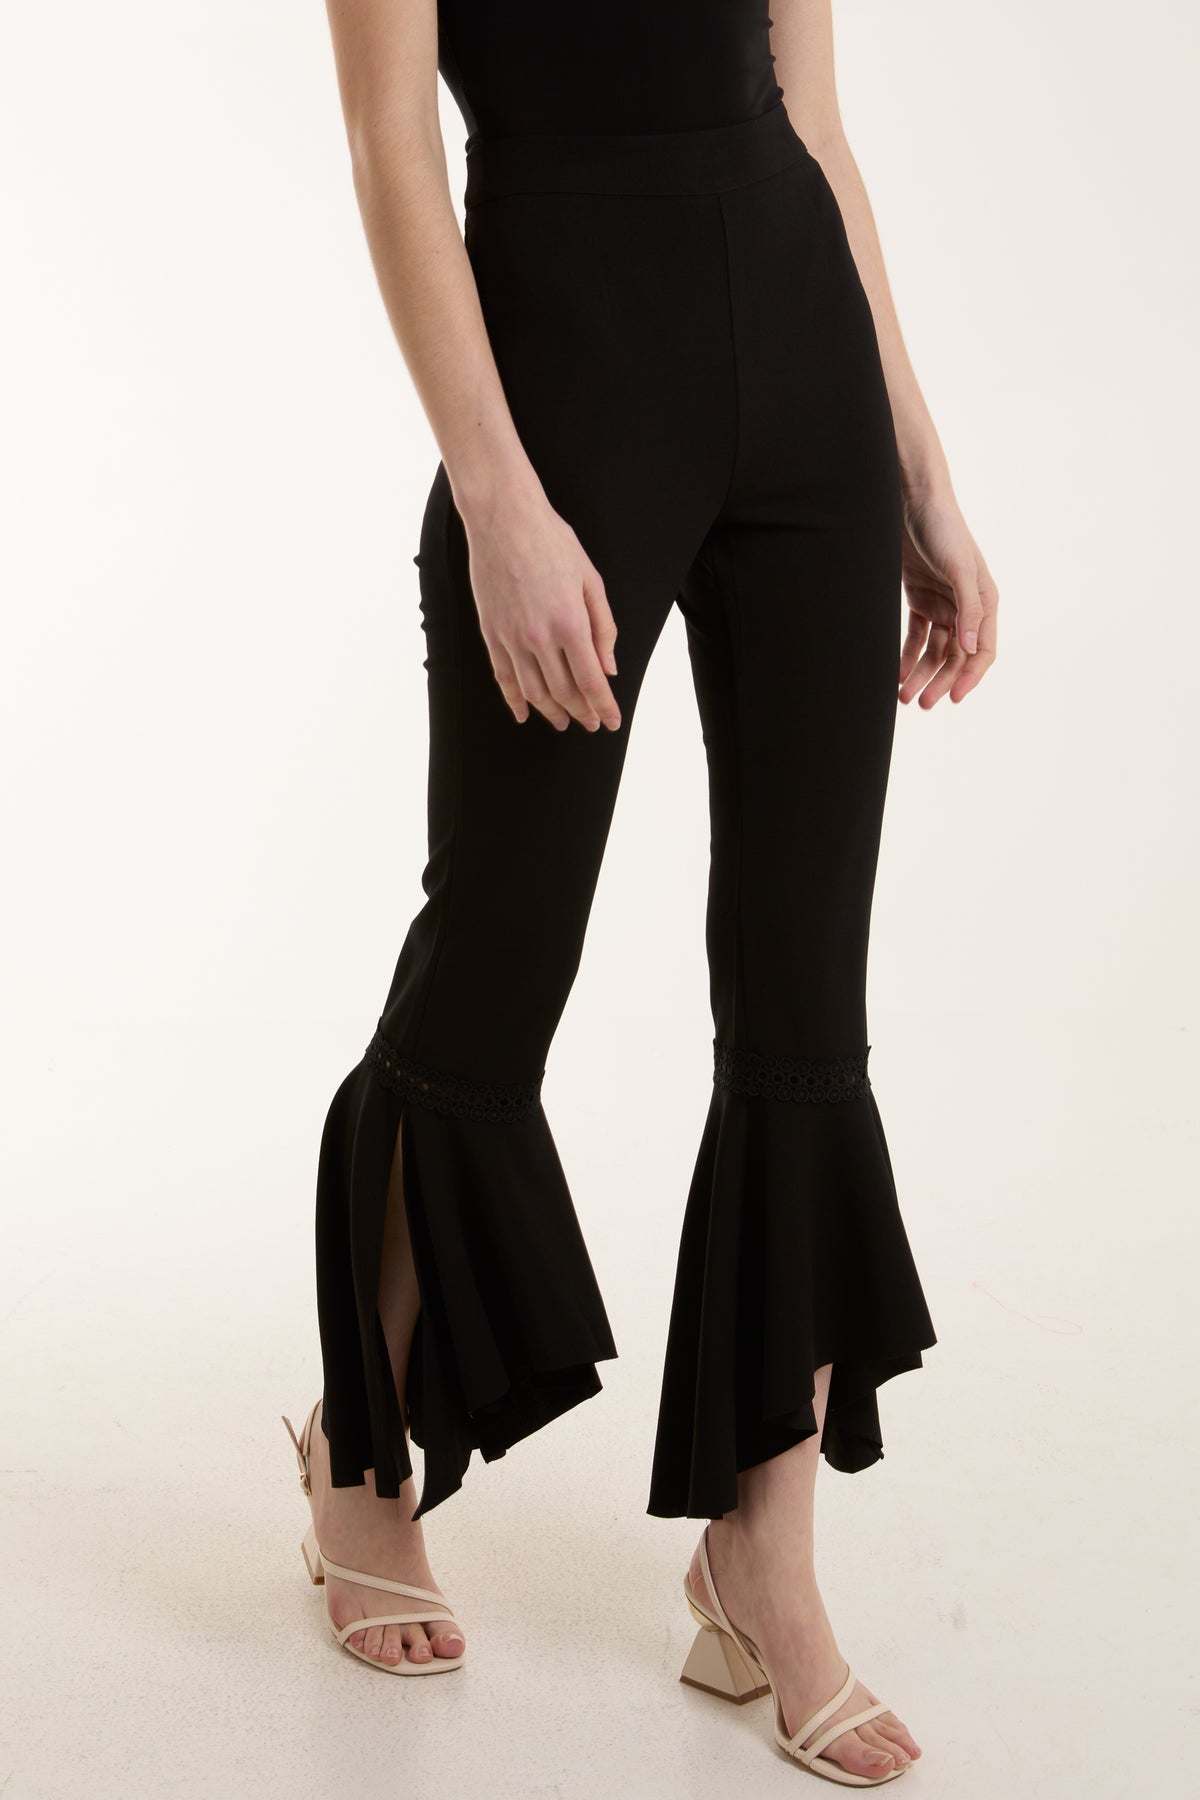 Fishtail Flares w/ Lace Insert Trousers